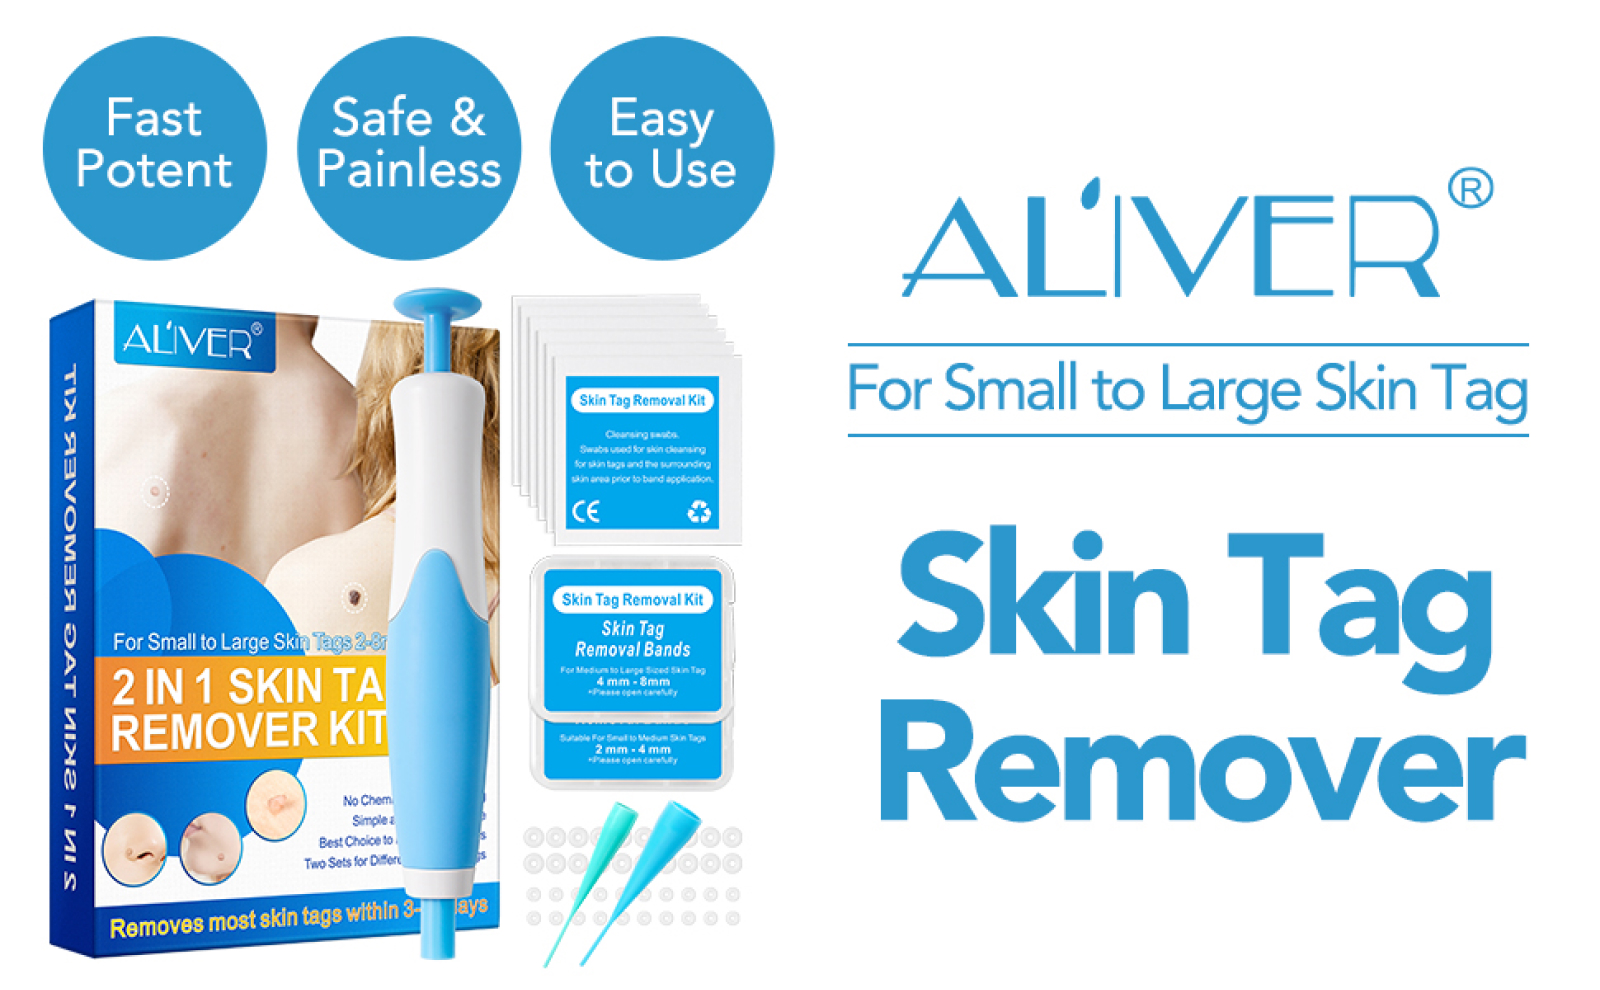 ALIVER skin tag removal kit utilizes the ligation method with small rubber bands 